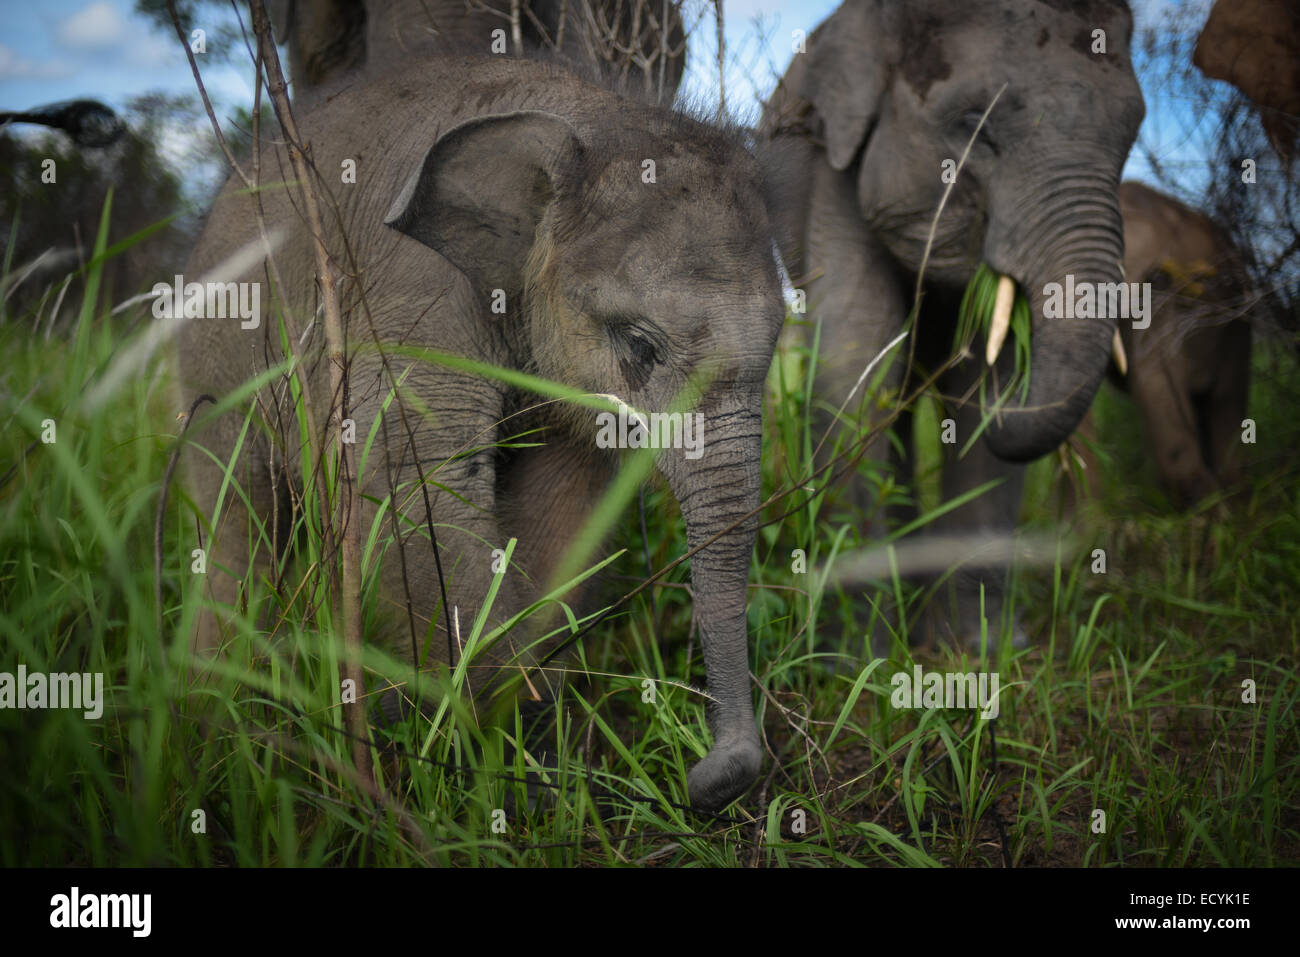 Elephant herd with young ones in Way Kambas National Park, Sumatra, Indonesia. Stock Photo